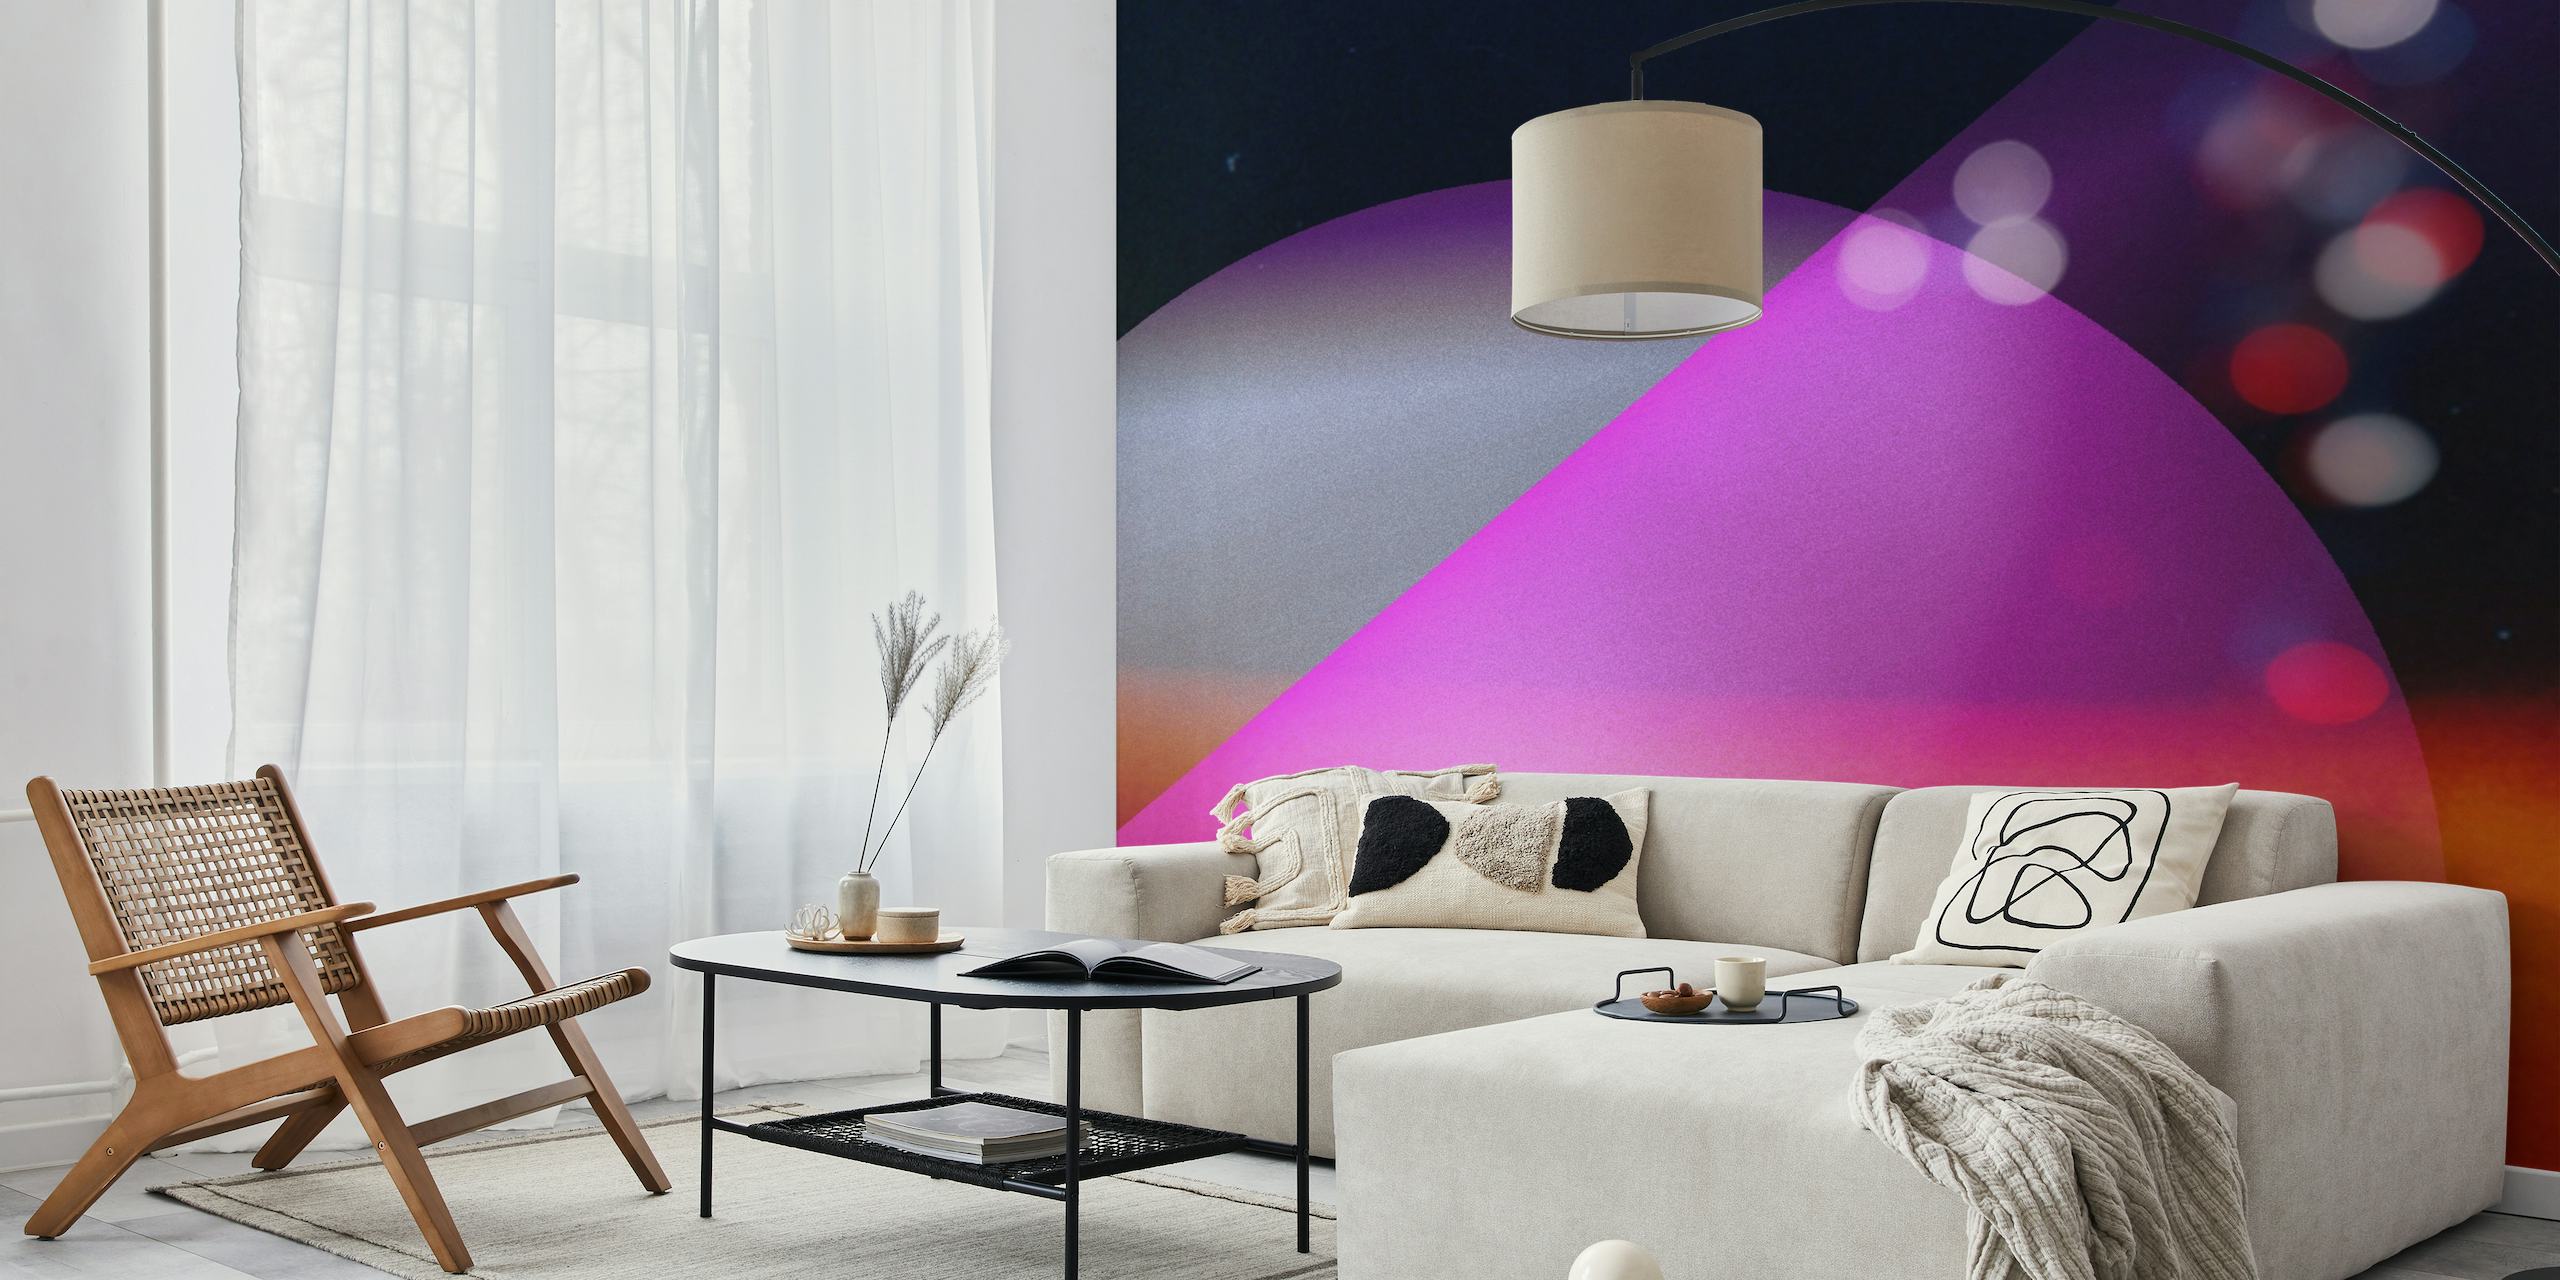 Abstract cosmic wall mural with vibrant purples, blues, and pinks resembling a distant universe